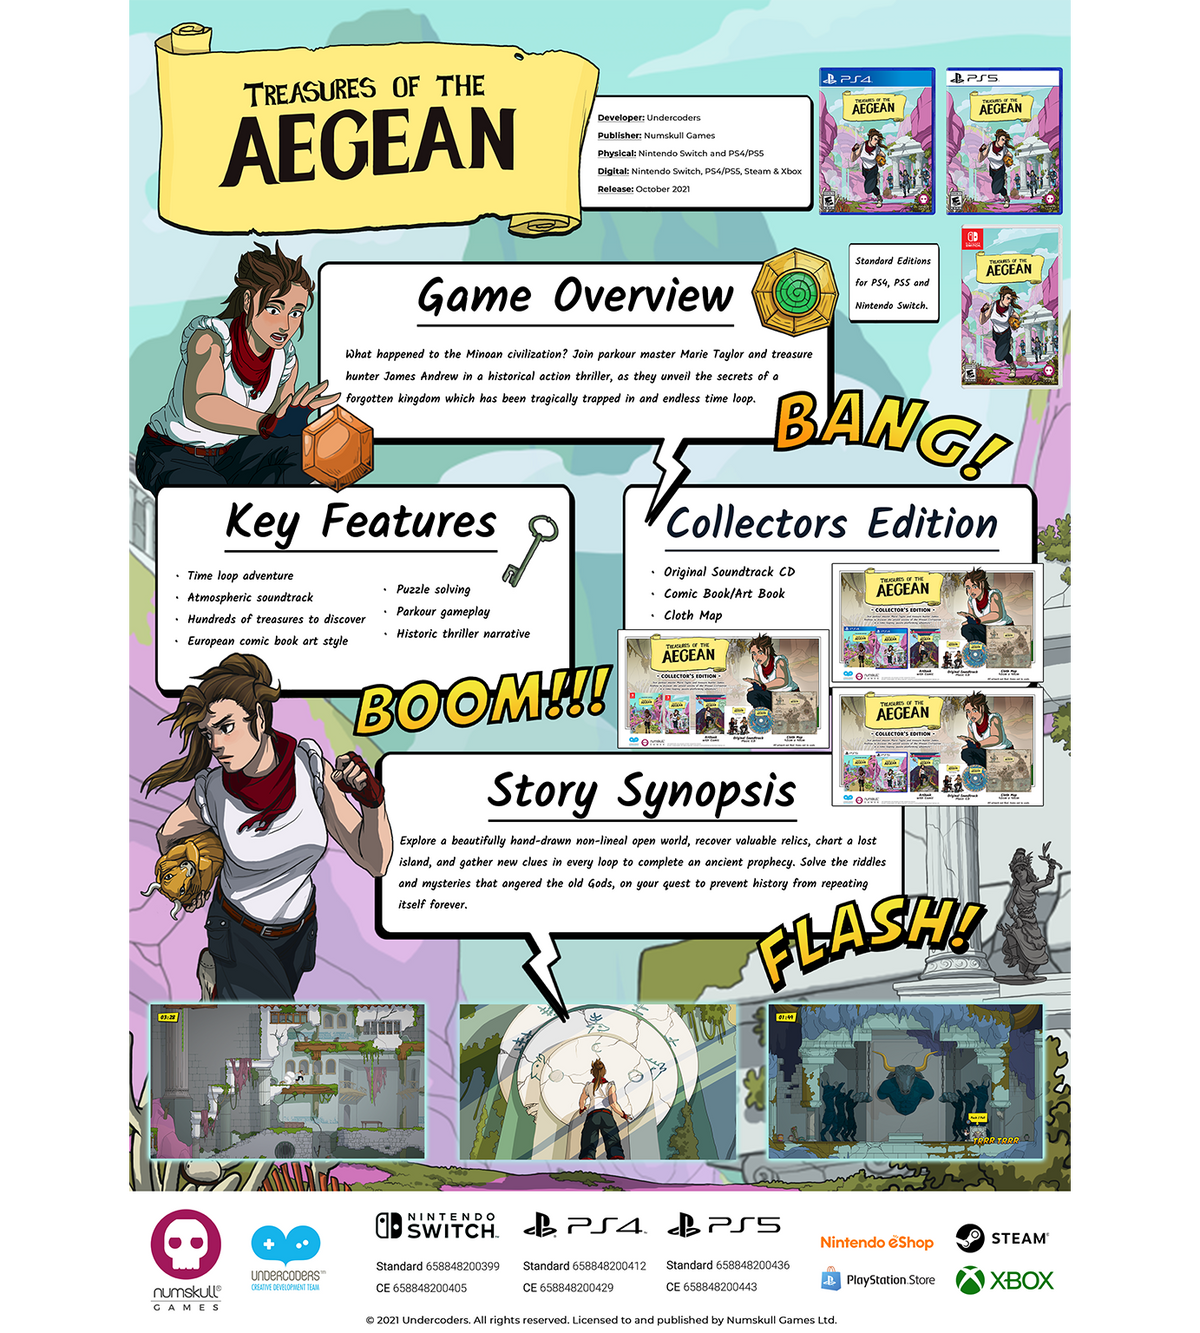 Treasures of the Aegean (Switch)